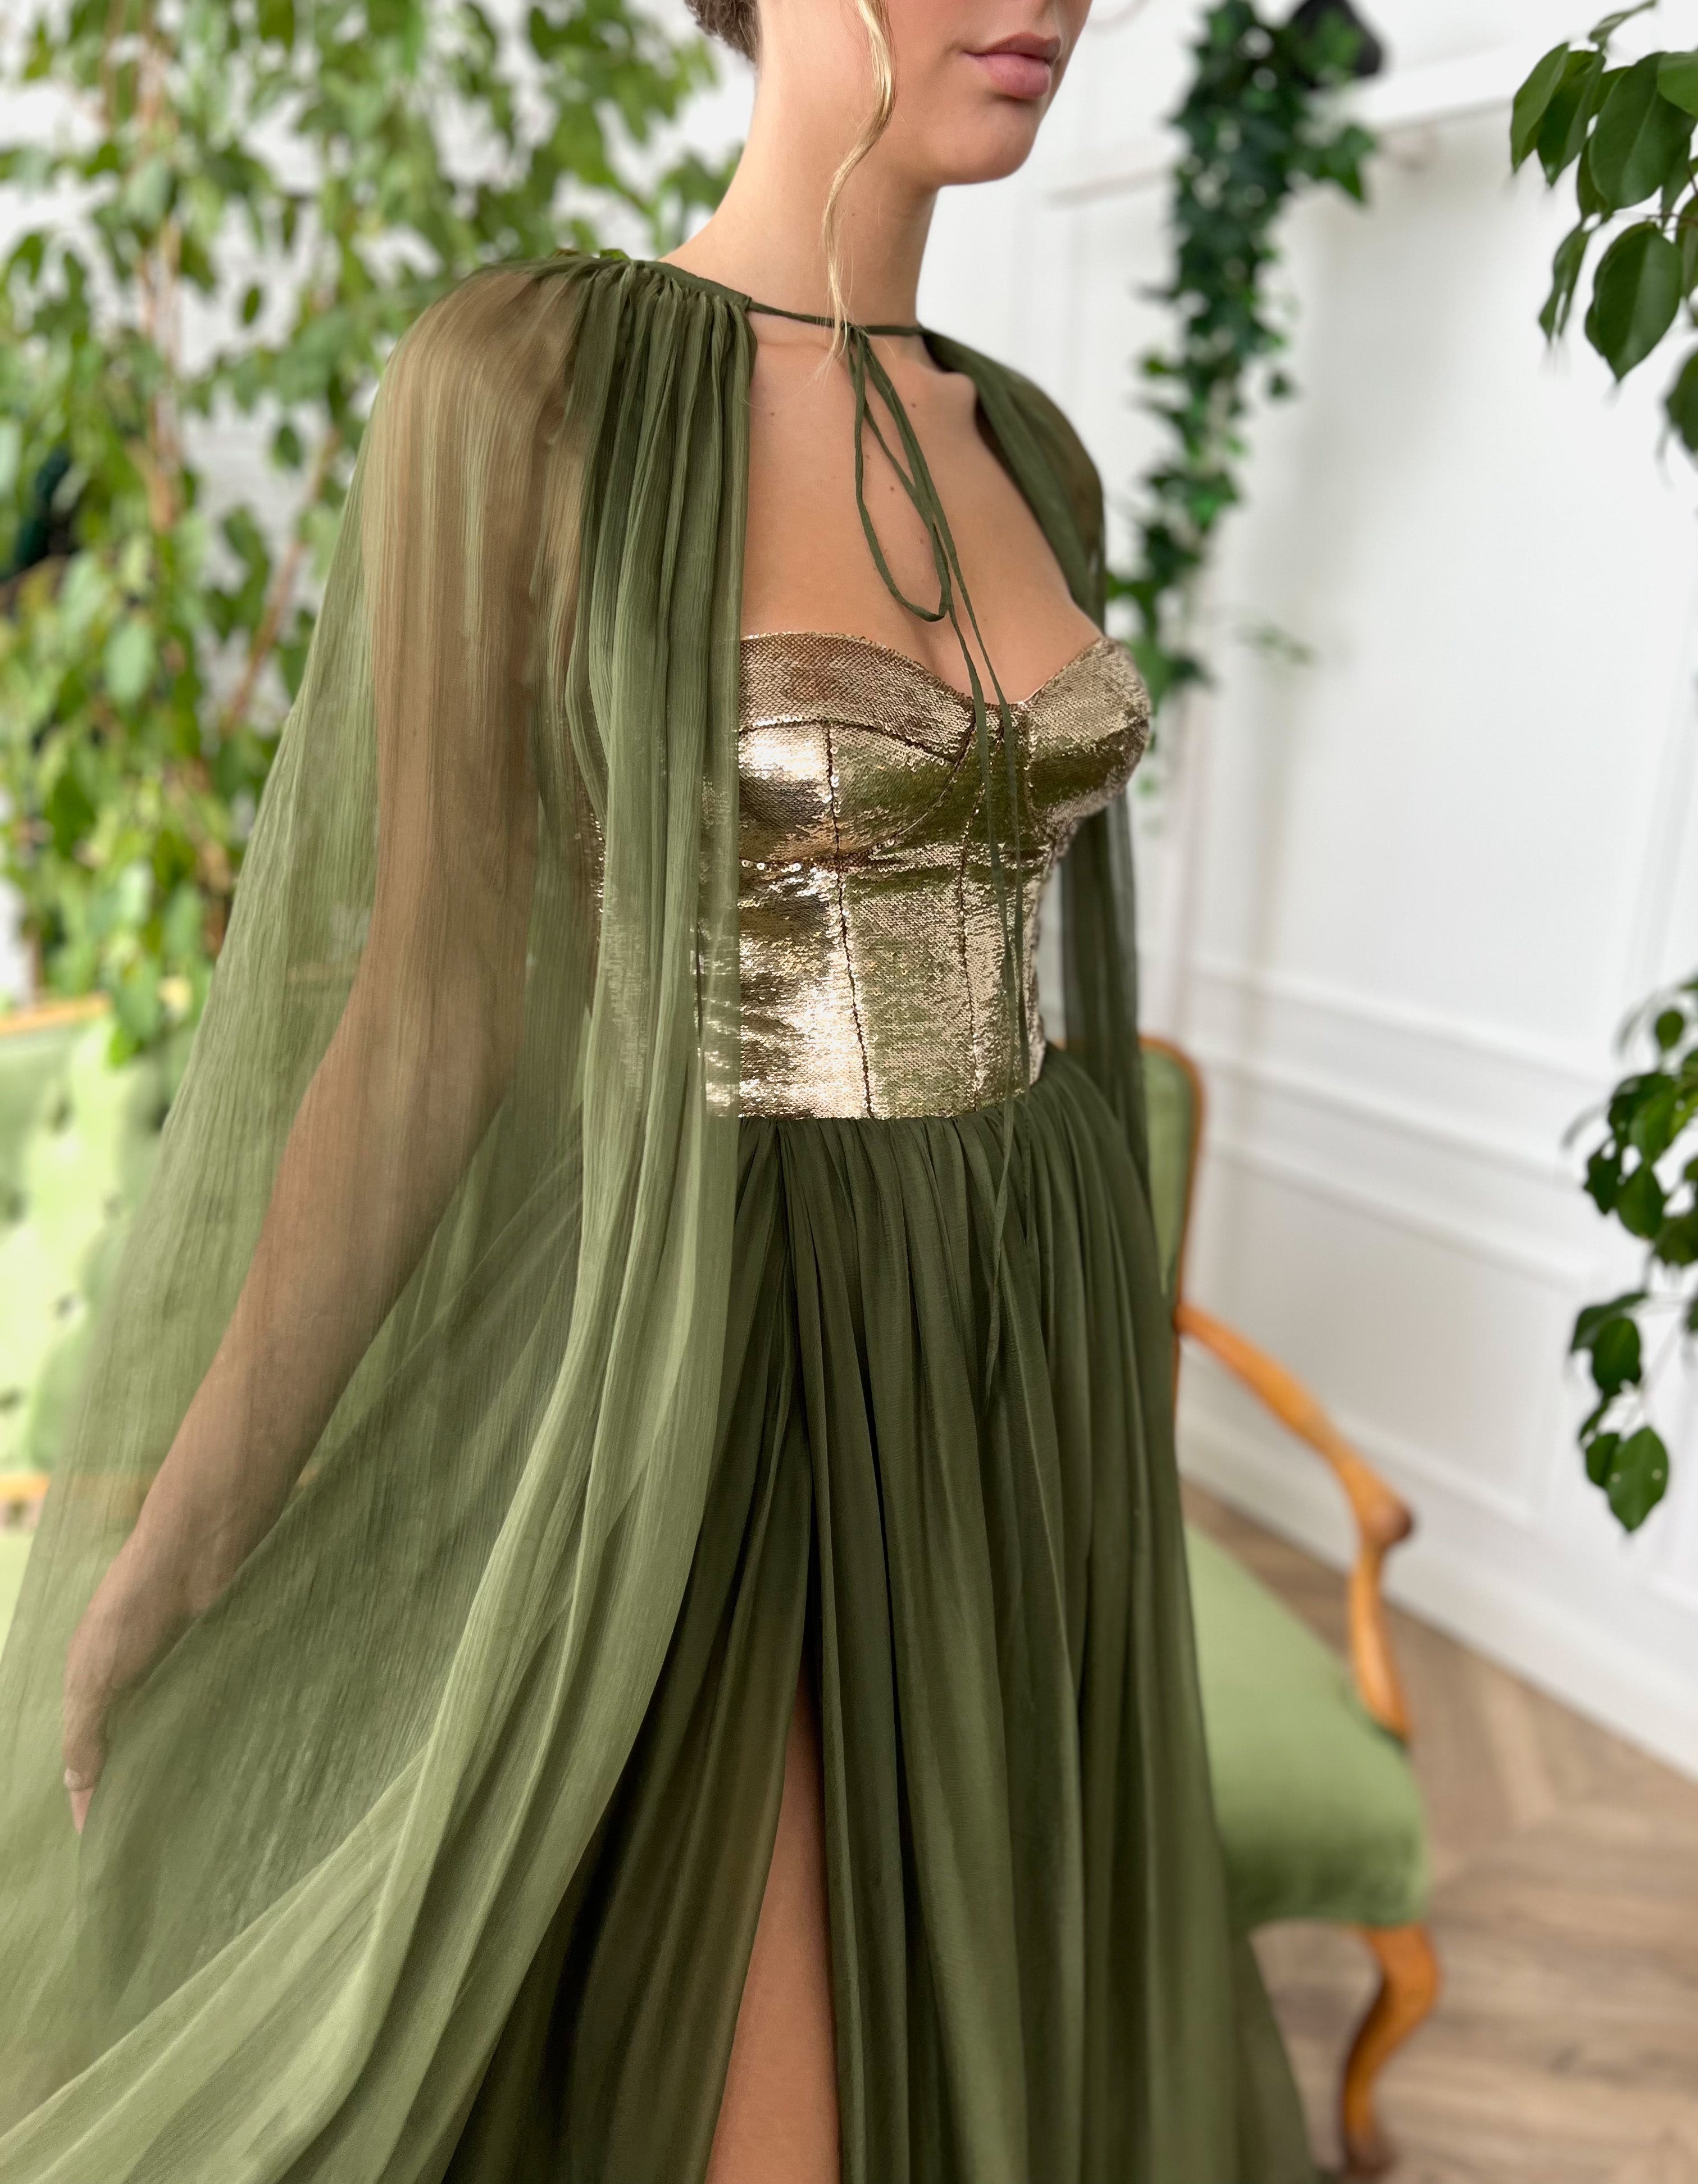 Green A-Line dress with cape and no sleeves